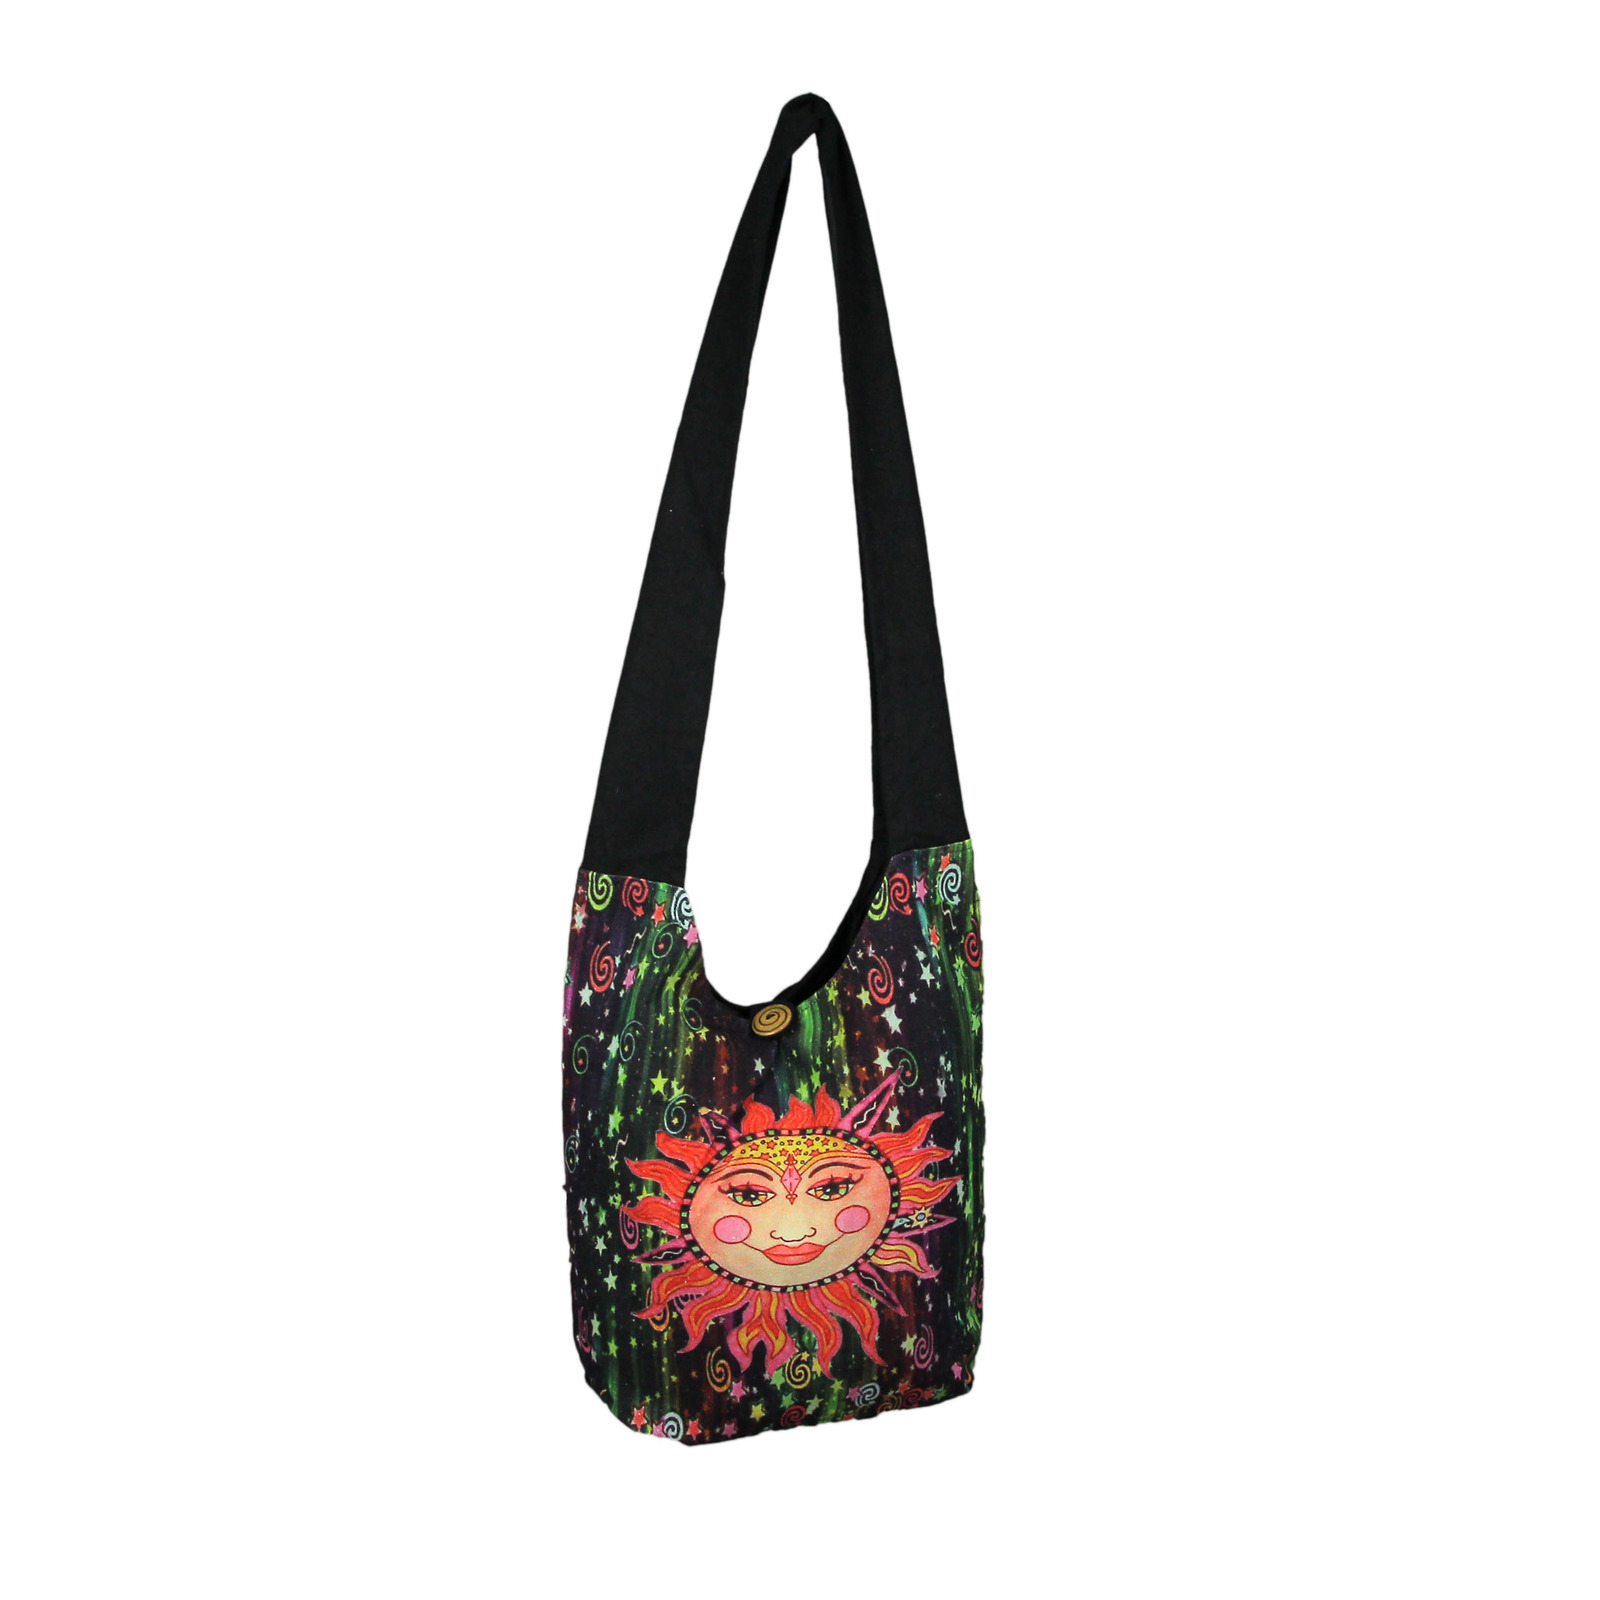 Primary image for Colorful Cotton Smiling Sun Sling Bag Zipper Pockets